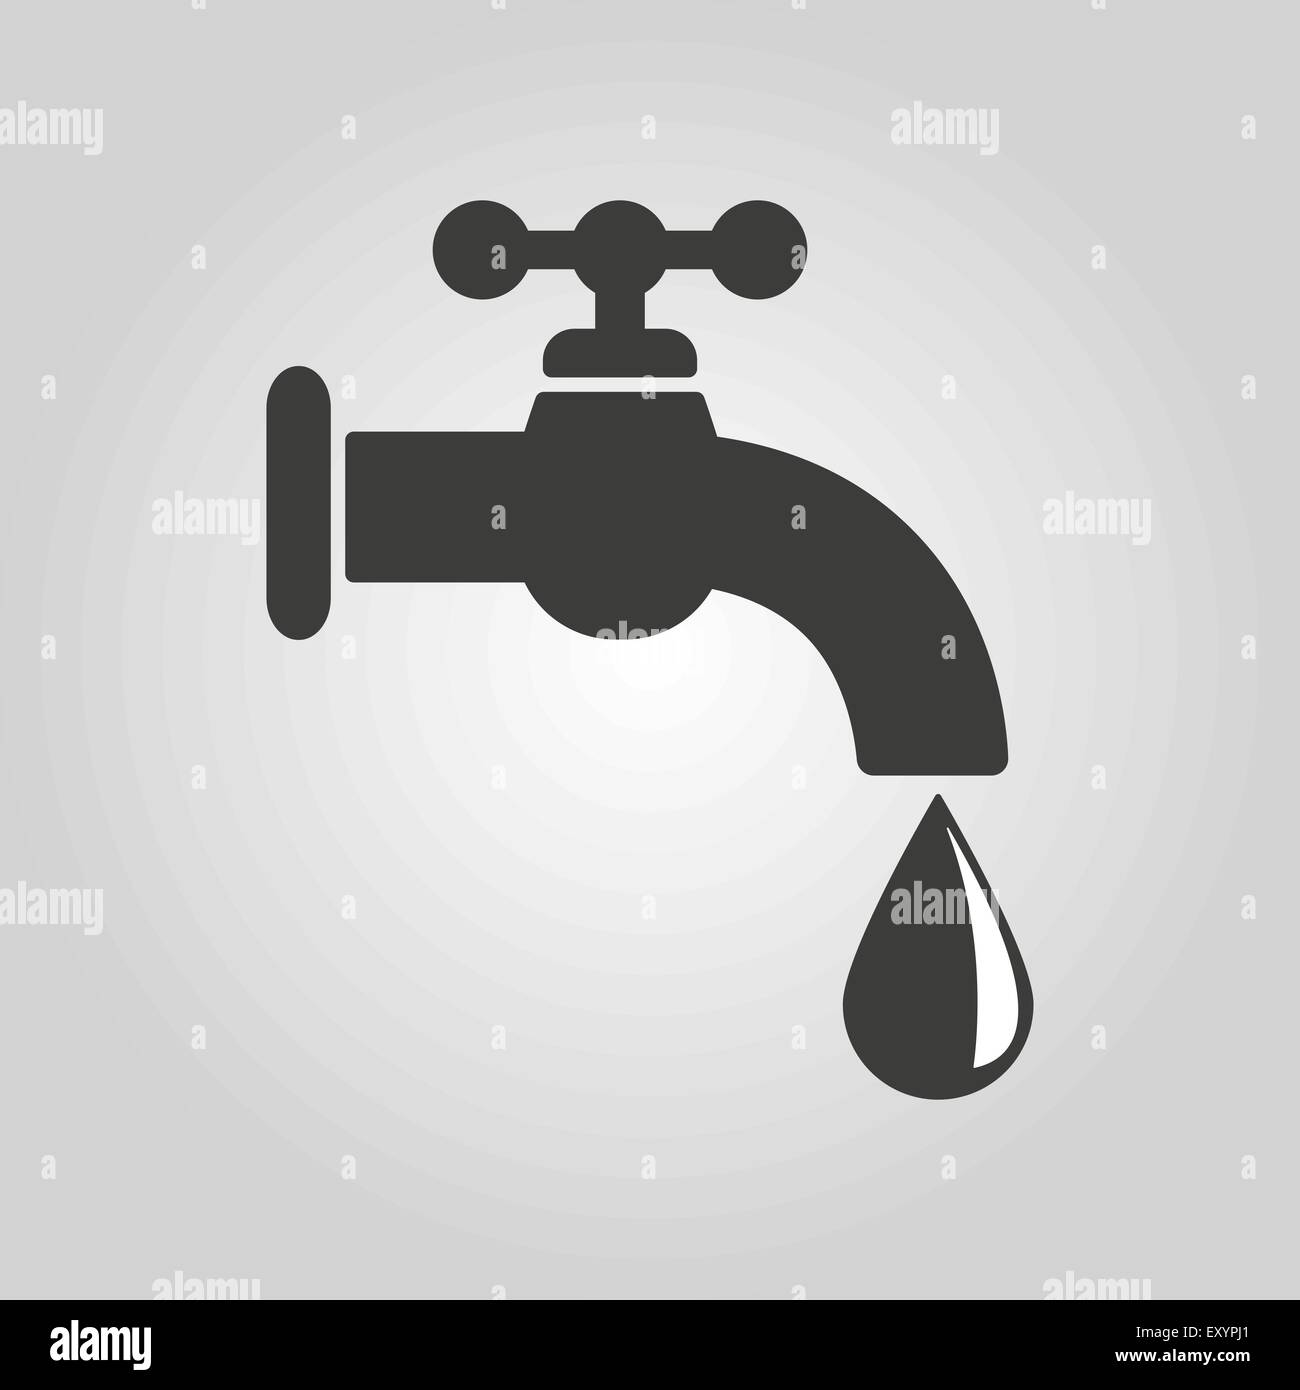 The tap water icon. Water symbol. Flat Stock Vector